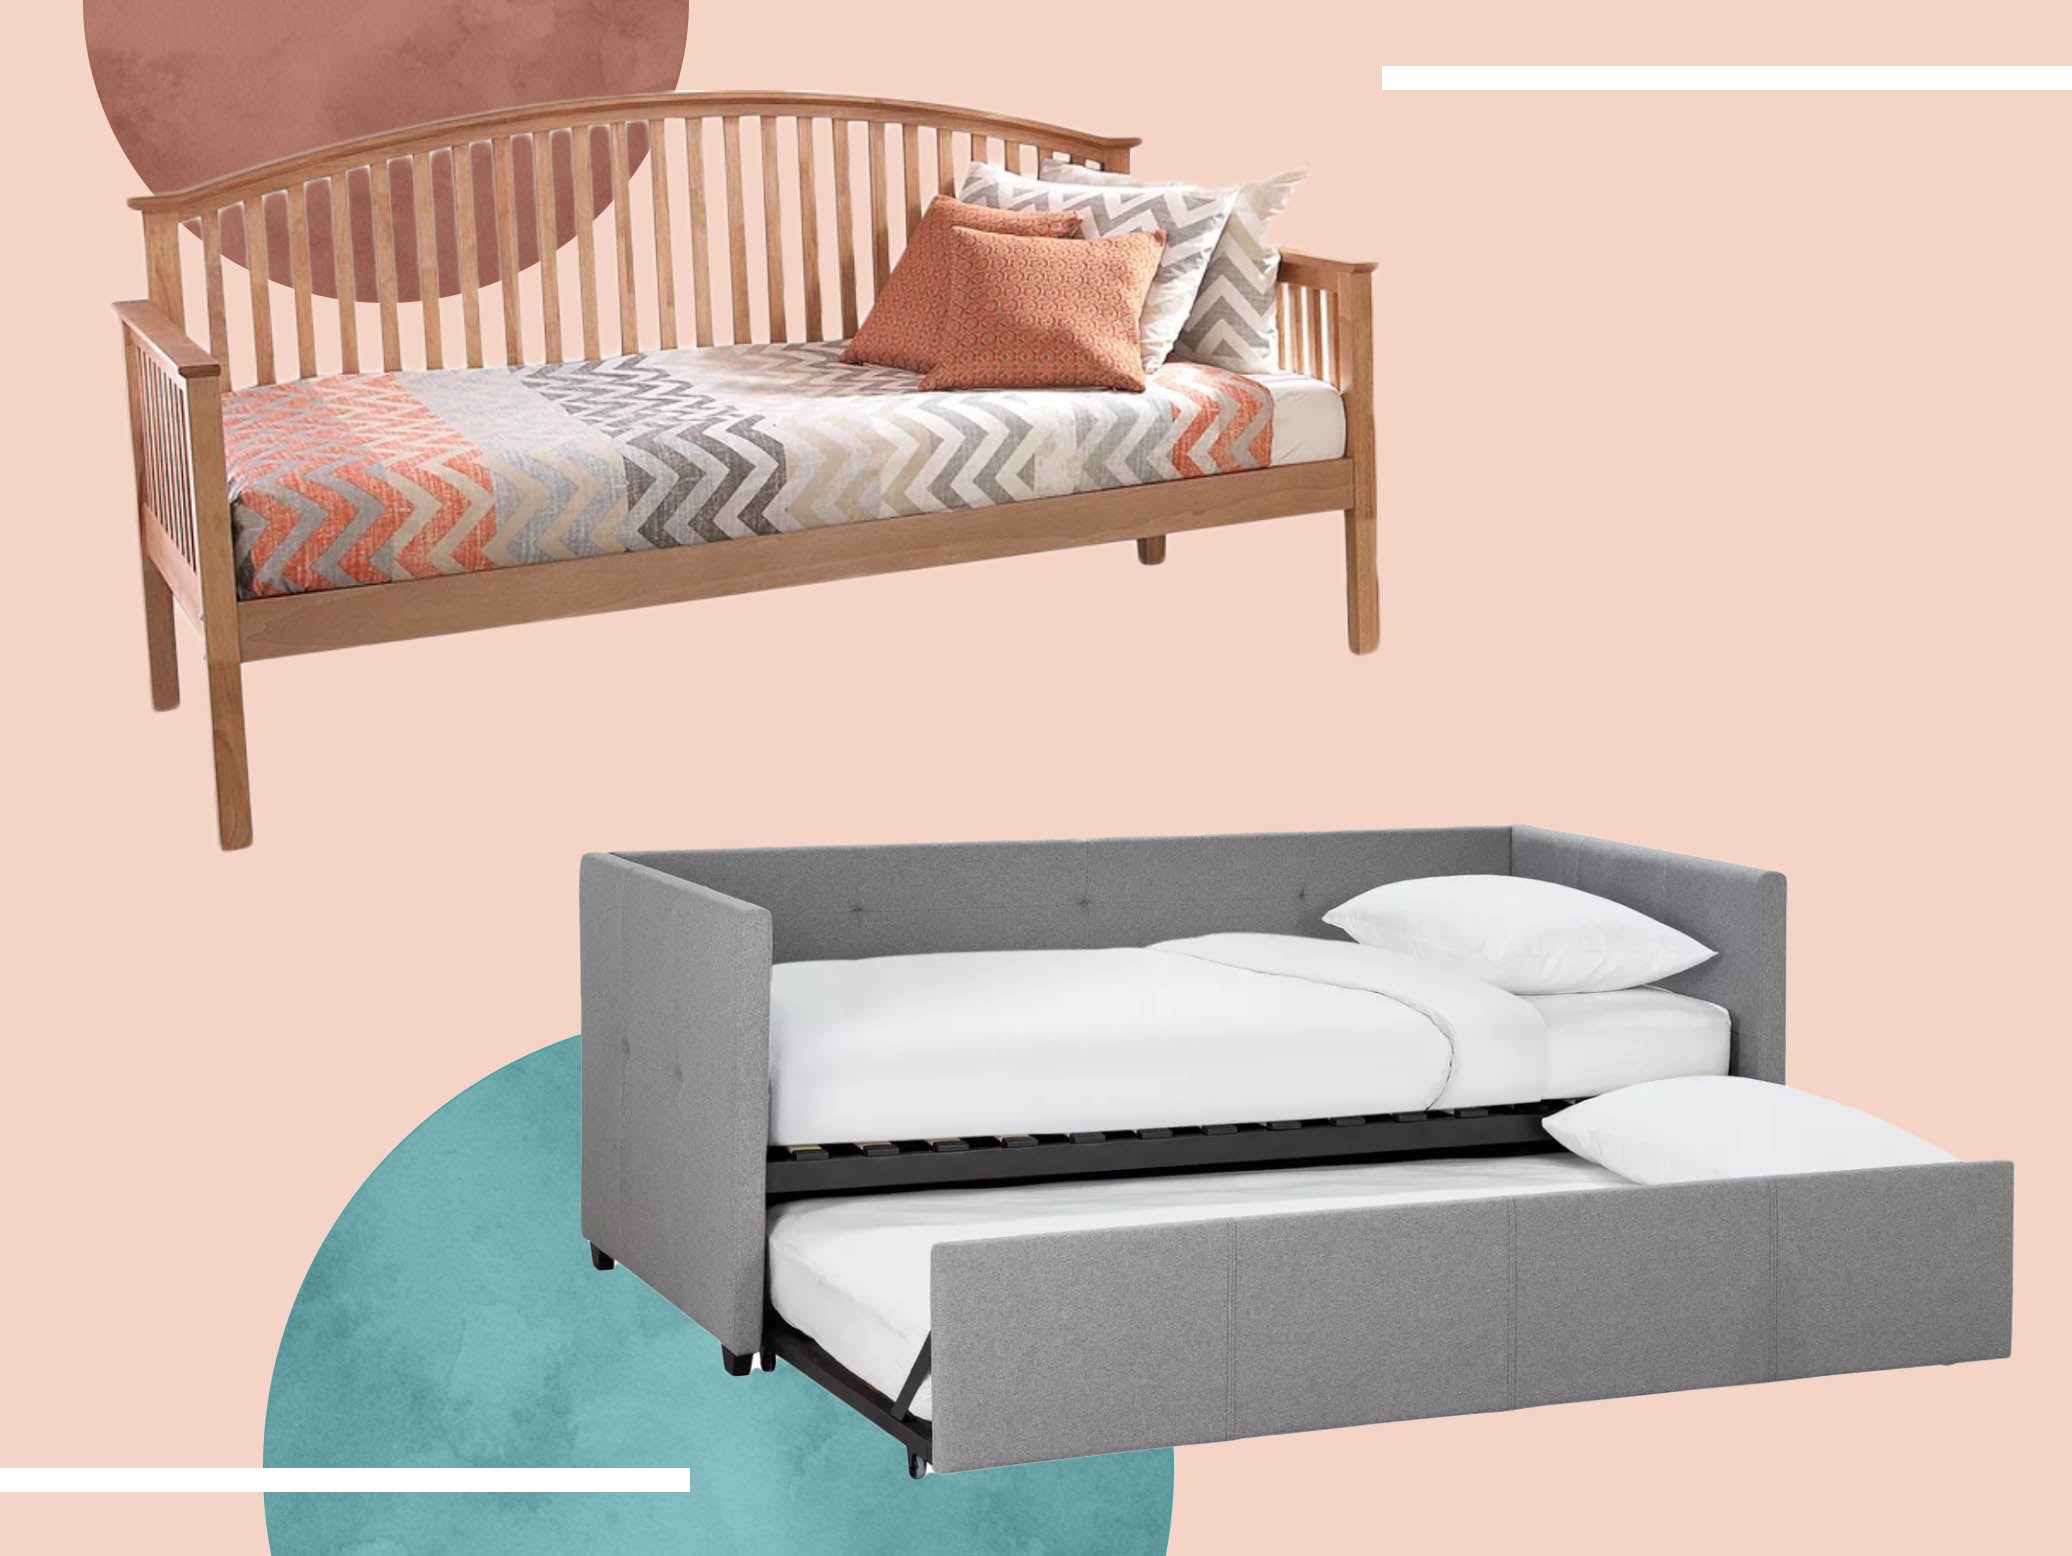 Mattresses are usually sold separately from the day bed, so you’ll need to factor that into your budget